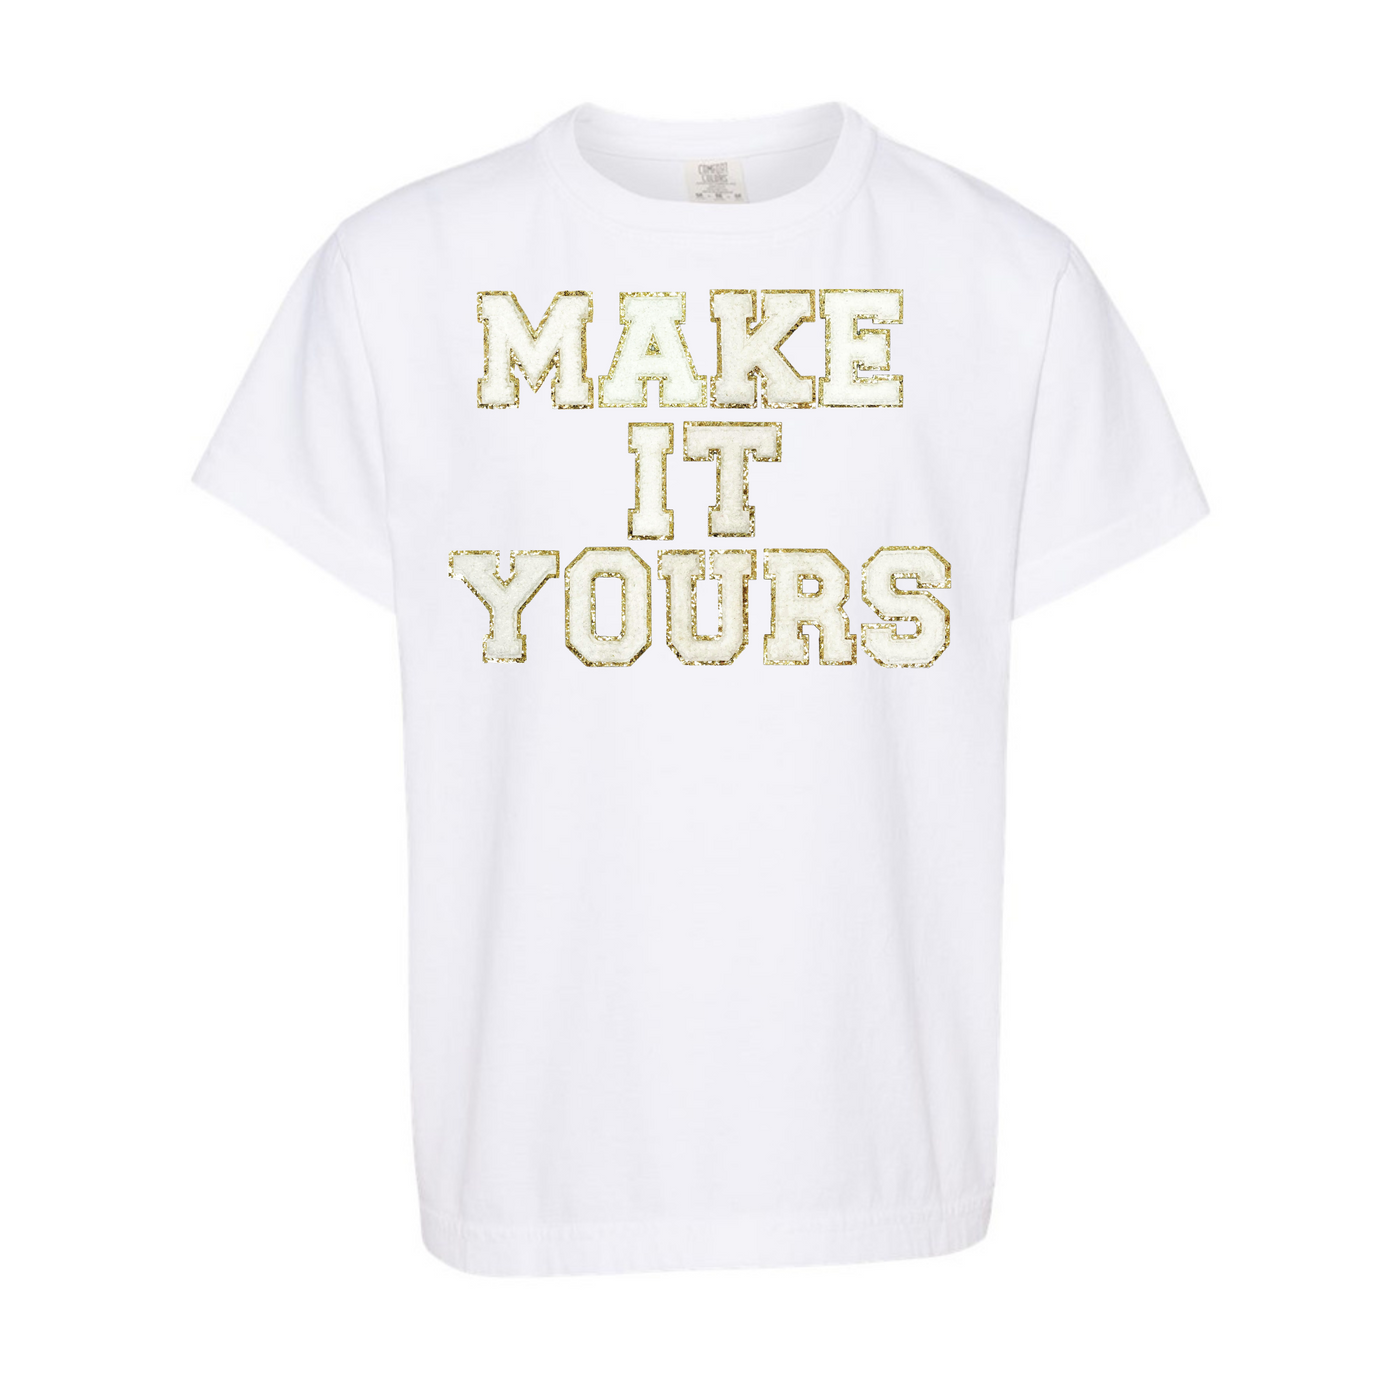 Kids Make It Yours™ Letter Patch T-Shirt